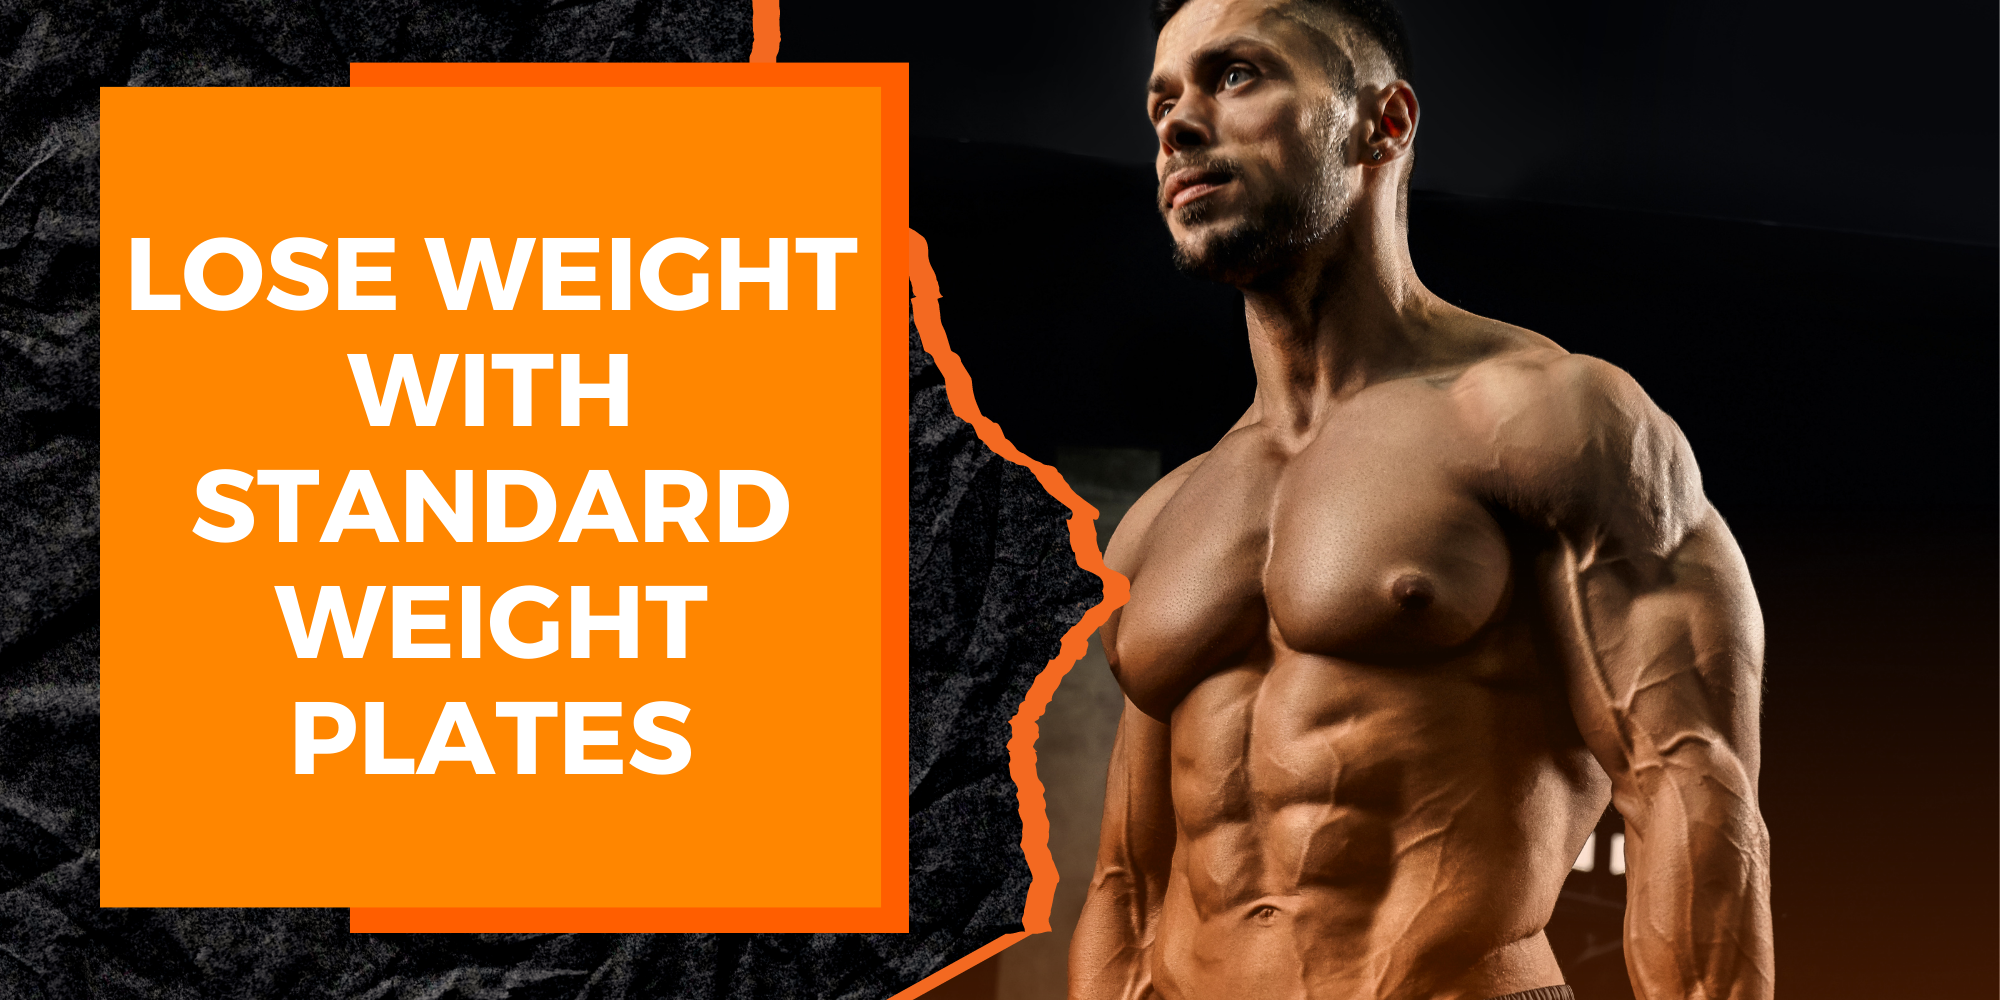 Lose Weight with Standard Weight Plates